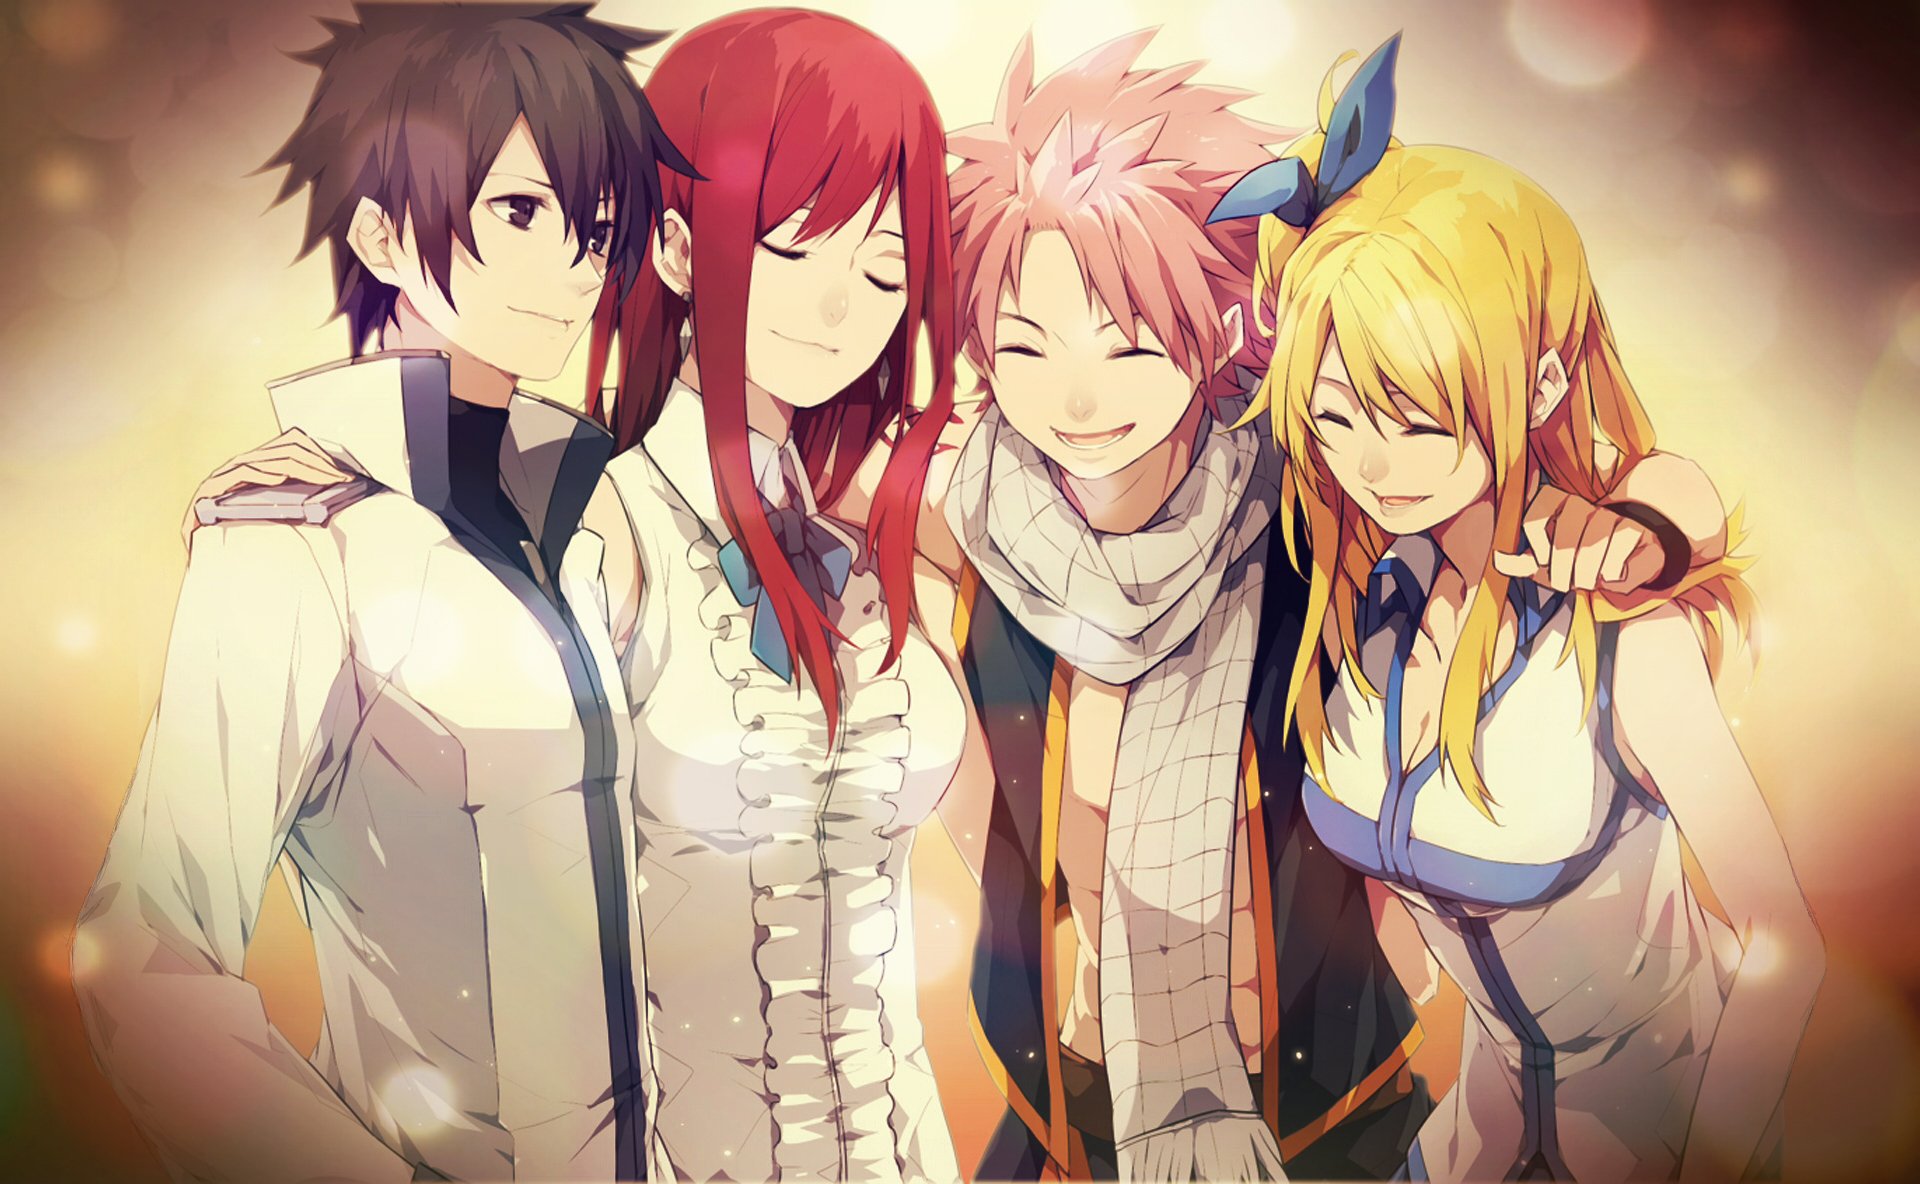 Anime Tale Of Fairy Tail Group Girl Boy Friend Series Wallpapers Hd Desktop And Mobile Backgrounds